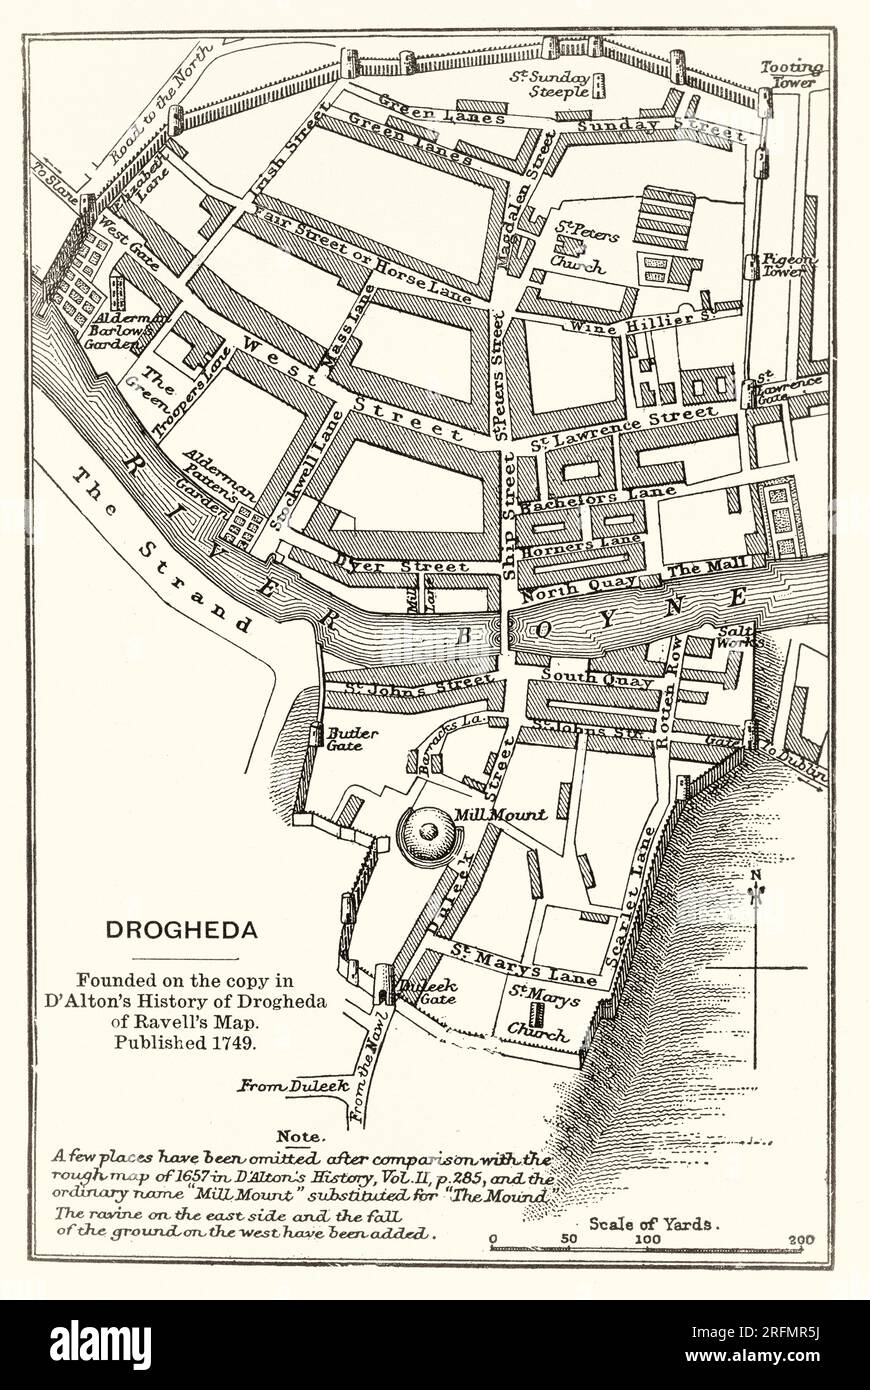 A 17th century plan of the siege of Drogheda that took place from in September 1649, at the outset of the Cromwellian conquest of Ireland. The coastal town of Drogheda was held by a mixed garrison of Irish Catholics and Royalists under the command of Sir Arthur Aston, when it was besieged by English Commonwealth forces under Oliver Cromwell. After Aston rejected an invitation to surrender, the town was stormed and much of the garrison executed, along with an unknown but 'significant number' of civilians. The siege is still viewed as an atrocity impacting Cromwell's reputation. Stock Photo